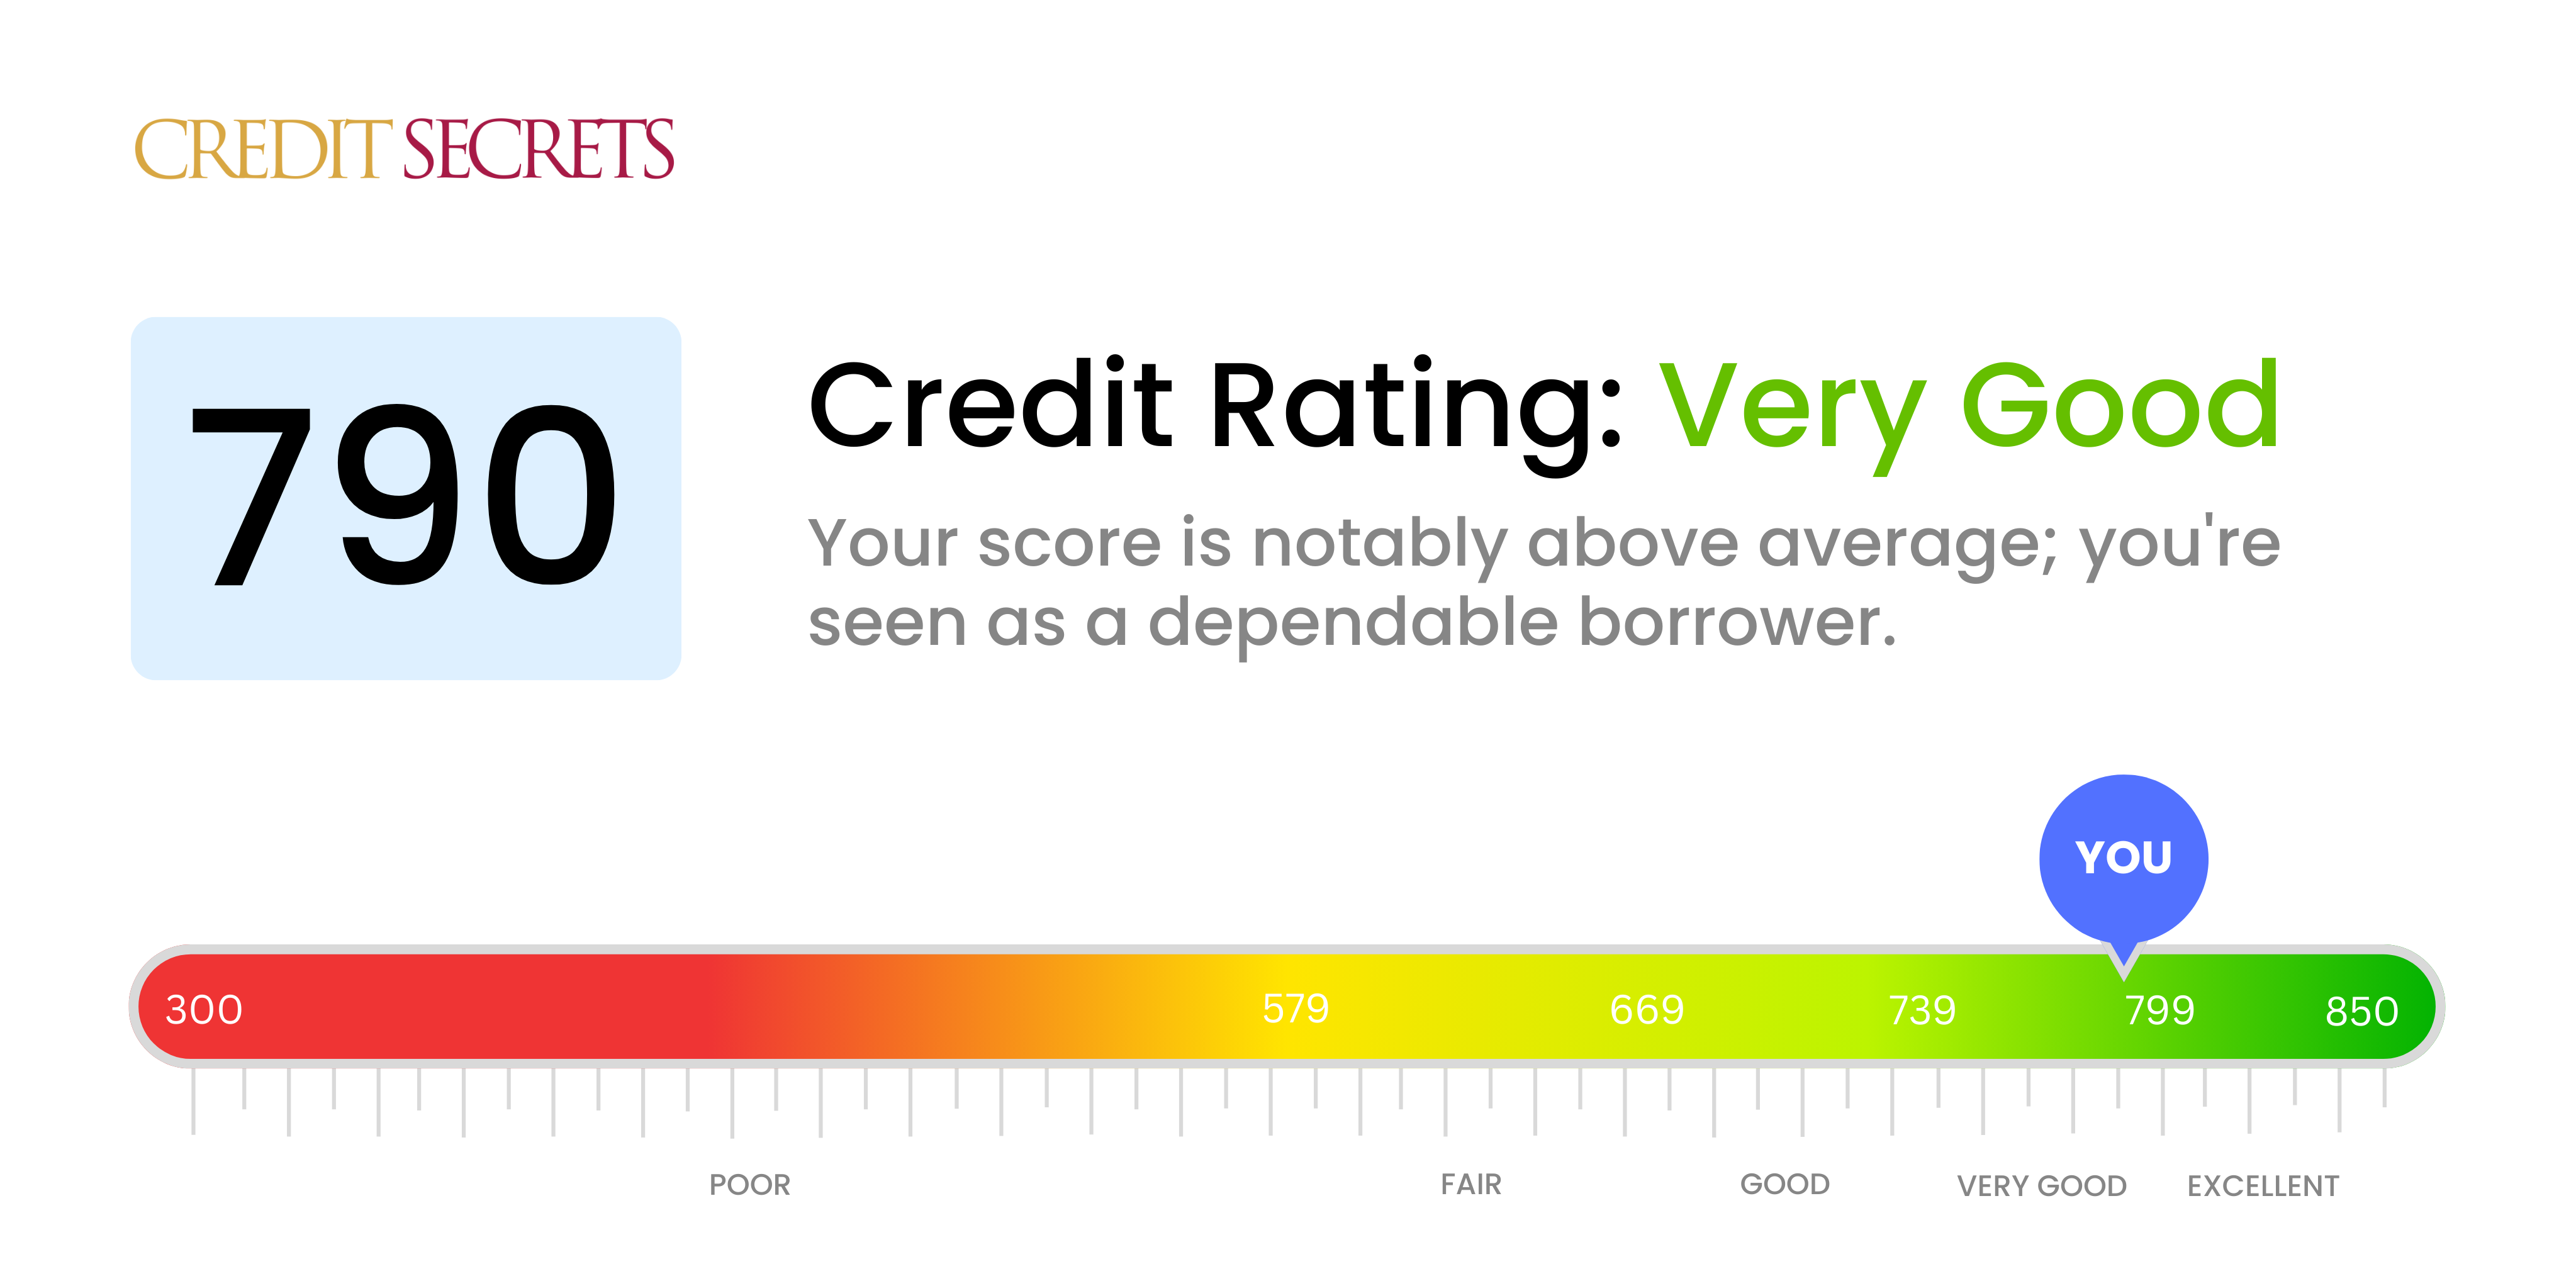 Is 790 a good credit score?